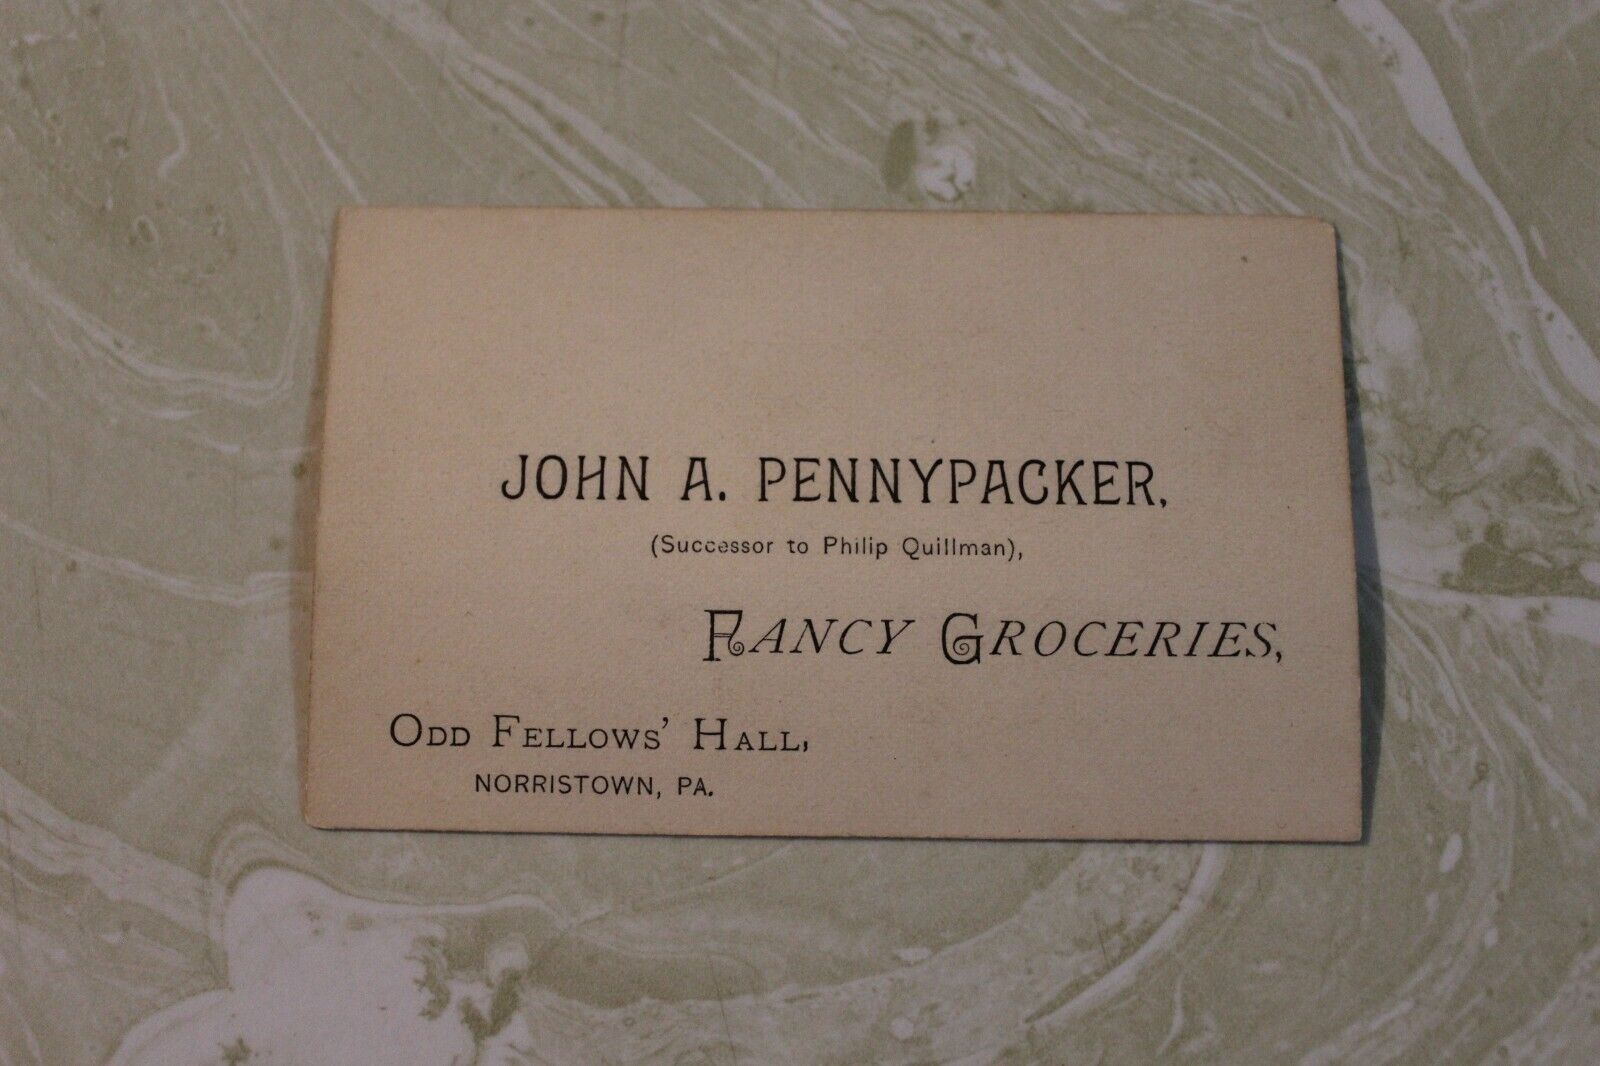 VTG. BUSINESS CARD FROM JOHN A. PENNYPACKER SUCCESSOR TO PHILLIP QUILLMAN